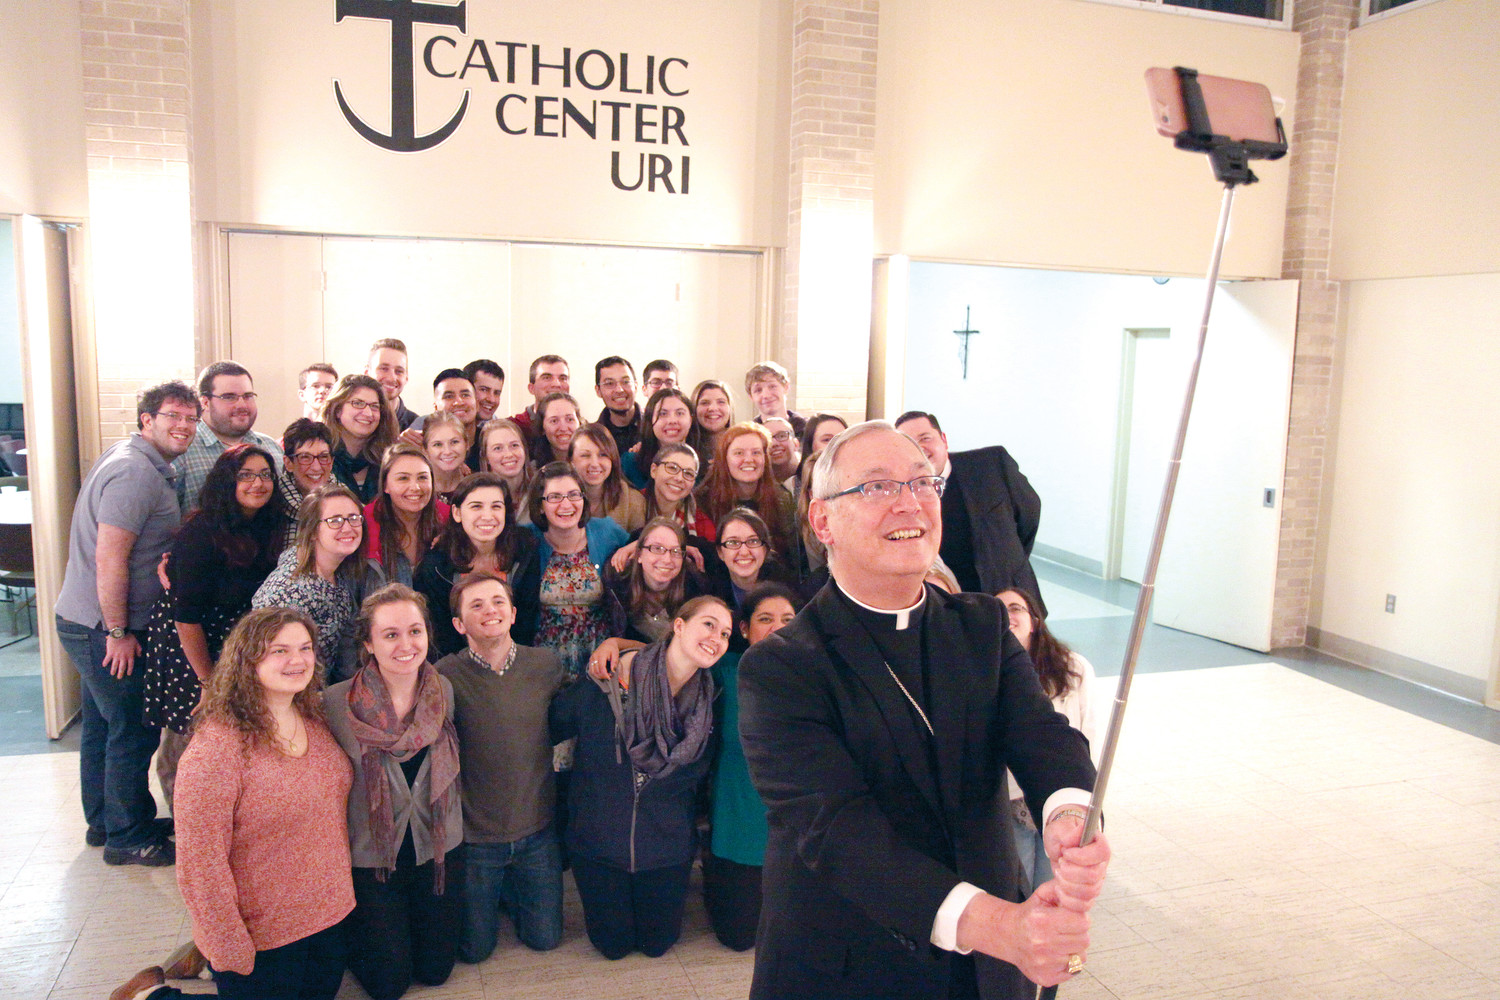 In March 2016, Bishop Tobin takes a selfie with students during a visit to the Catholic Center at the University of Rhode Island.